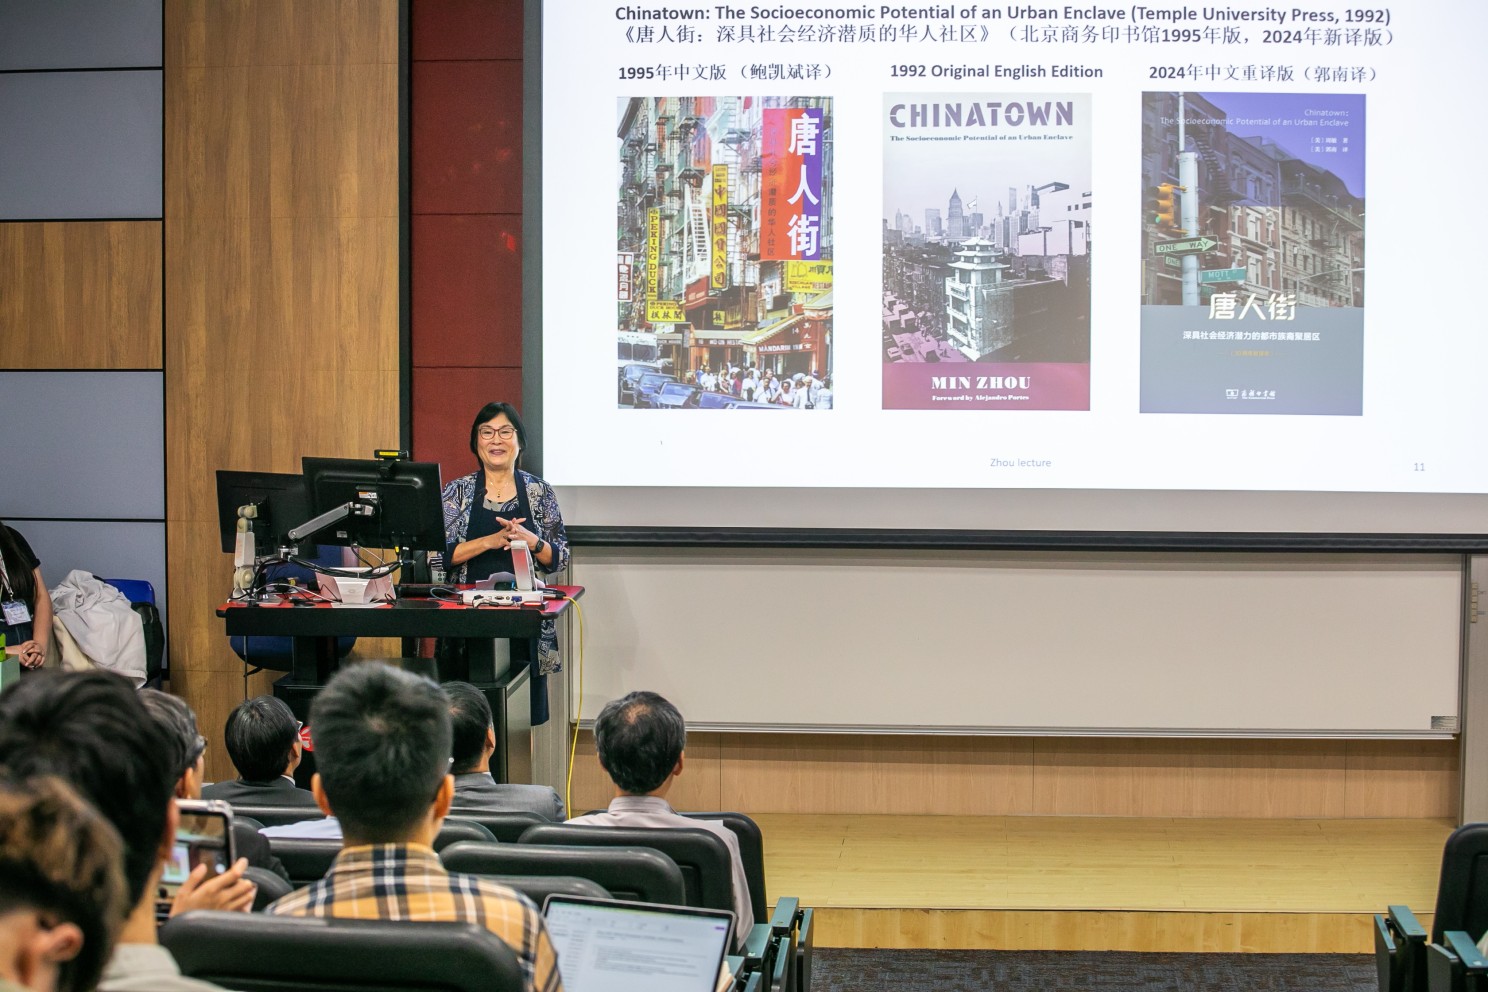  Prof Zhou inspires the audience and broadens students' critical thinking and analytical skills with her distinctive perspective.